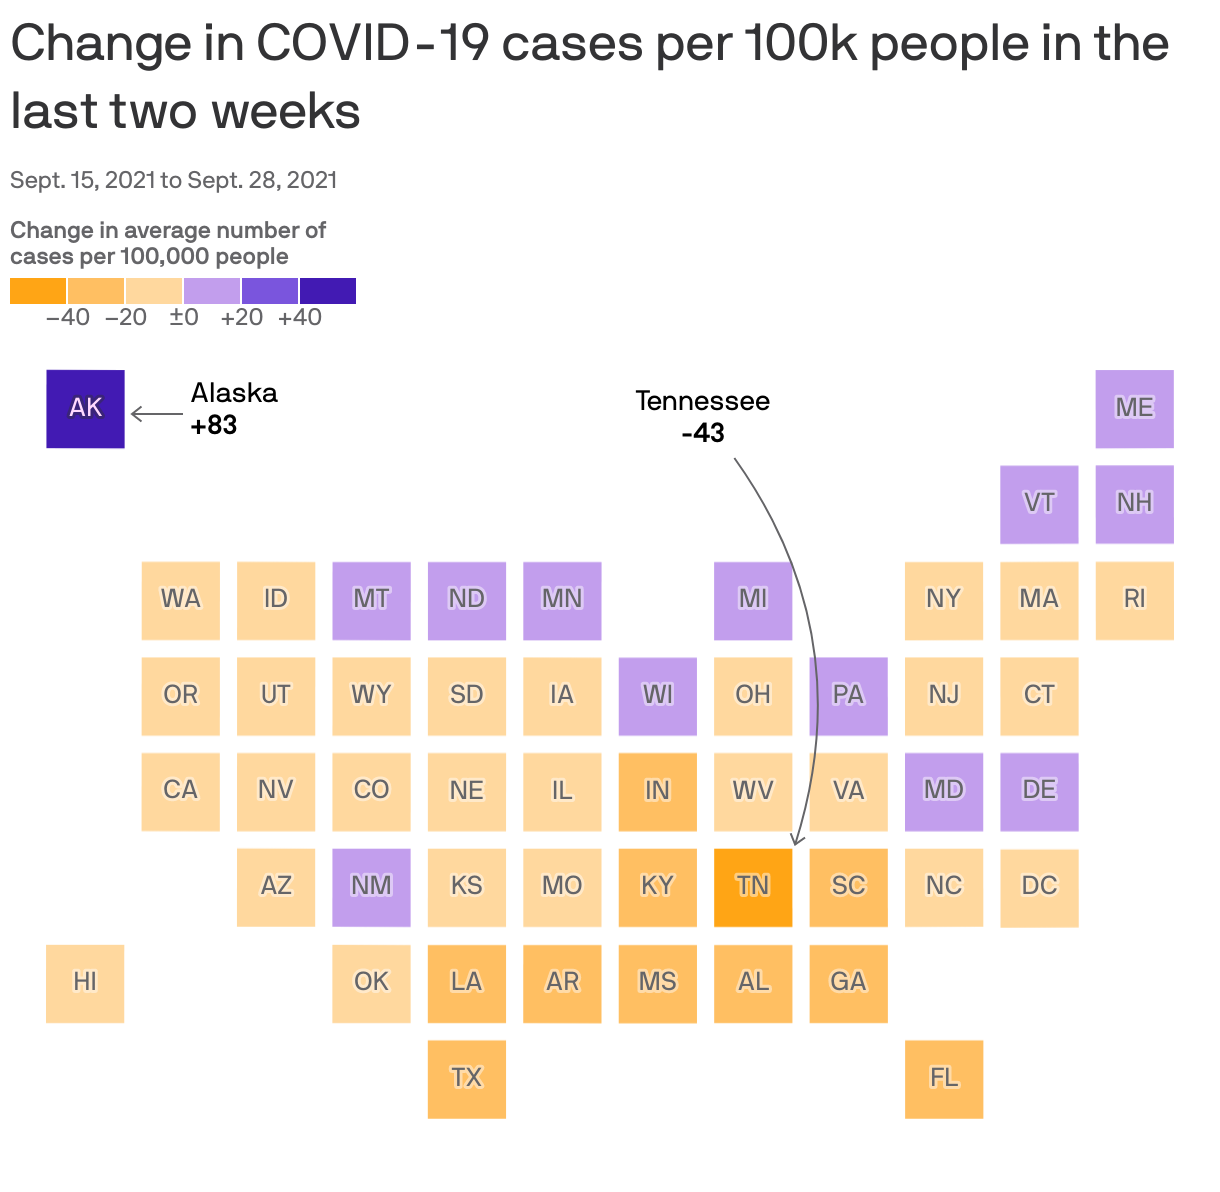 Change in COVID-19 cases per 100k people in the last two weeks